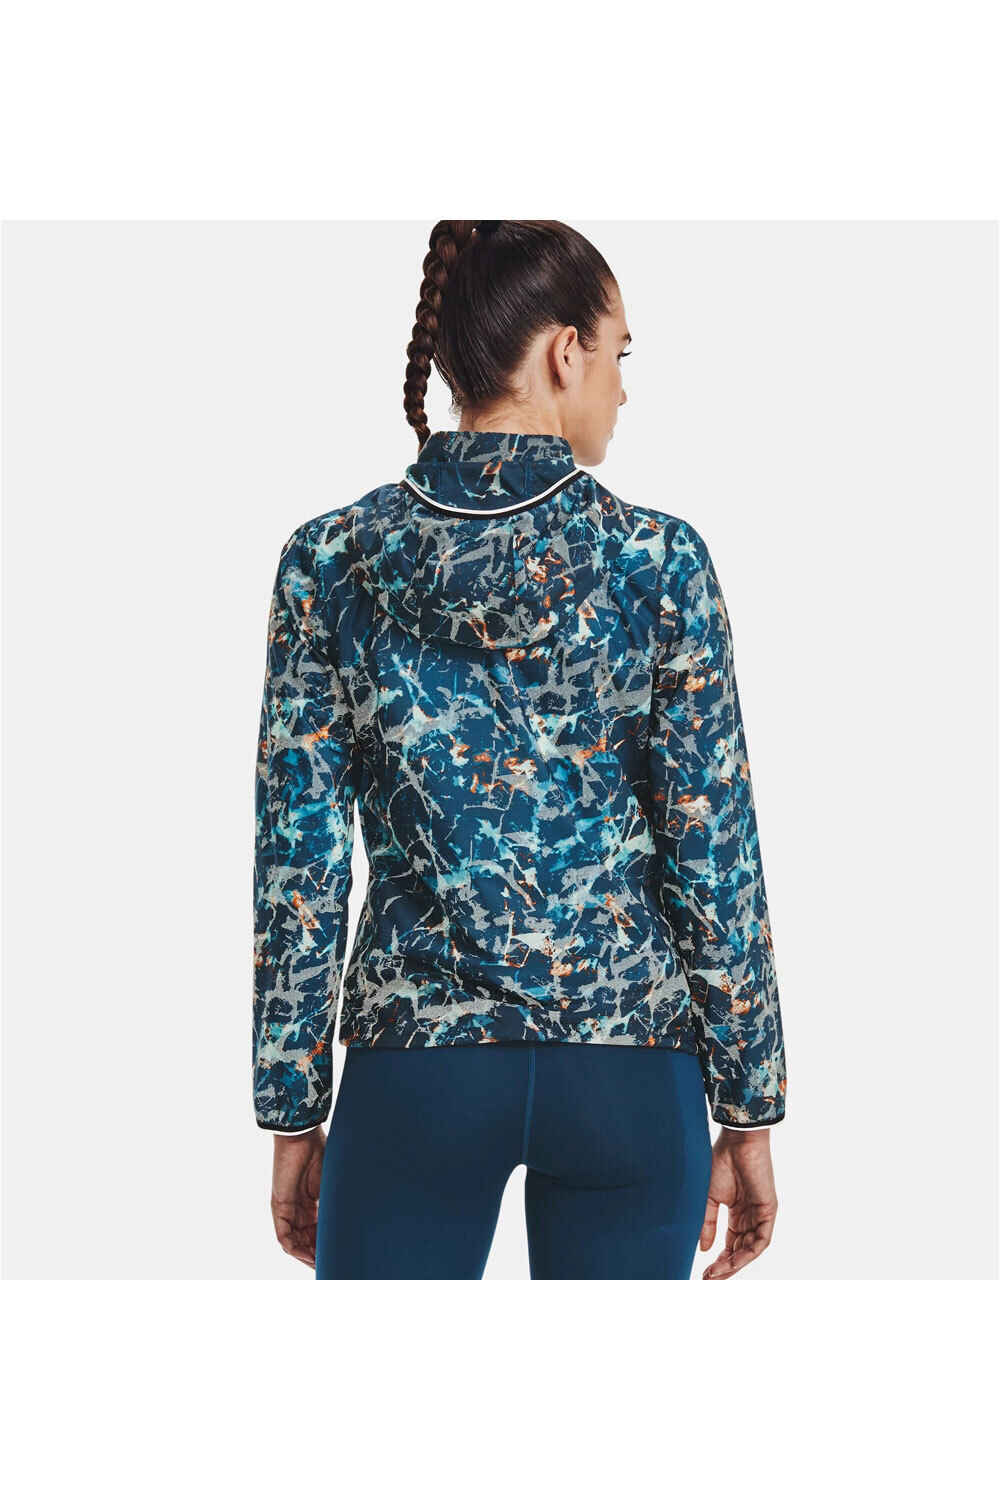 Under Armour CHAQUETA RUNNING MUJER UA STORM OUTRUN COLD JACKET vista trasera